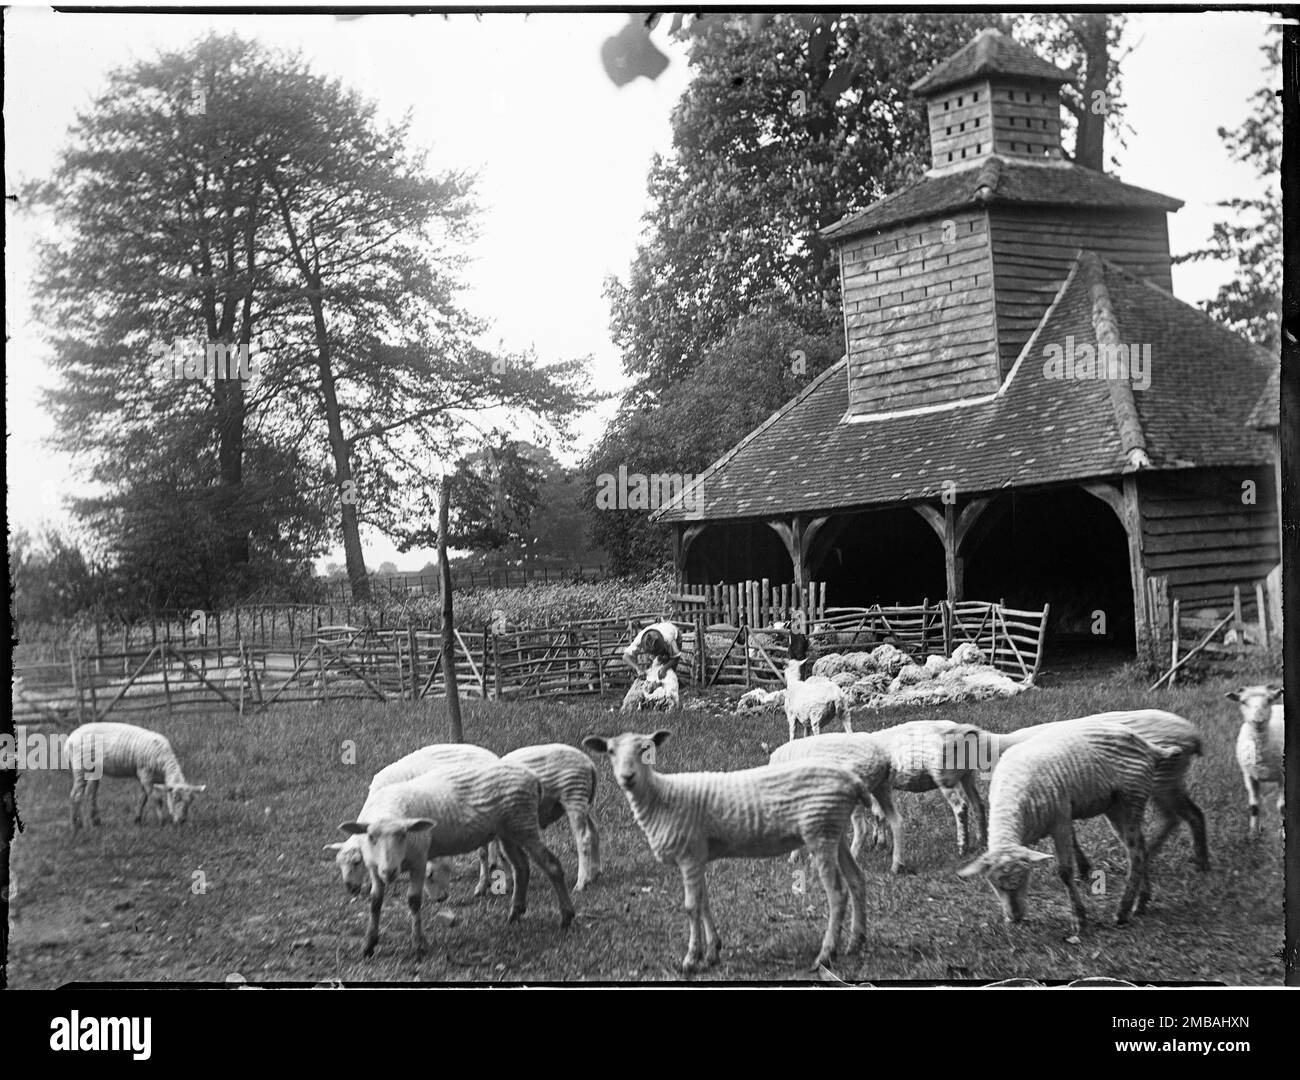 Gate Cottage, Dovecote, Horsenden, Princes Risborough, Wycombe, Buckinghamshire, 1918. A man shearing sheep in front of the dovecote at Gate Cottage, with newly shorn sheep in the foreground. Stock Photo